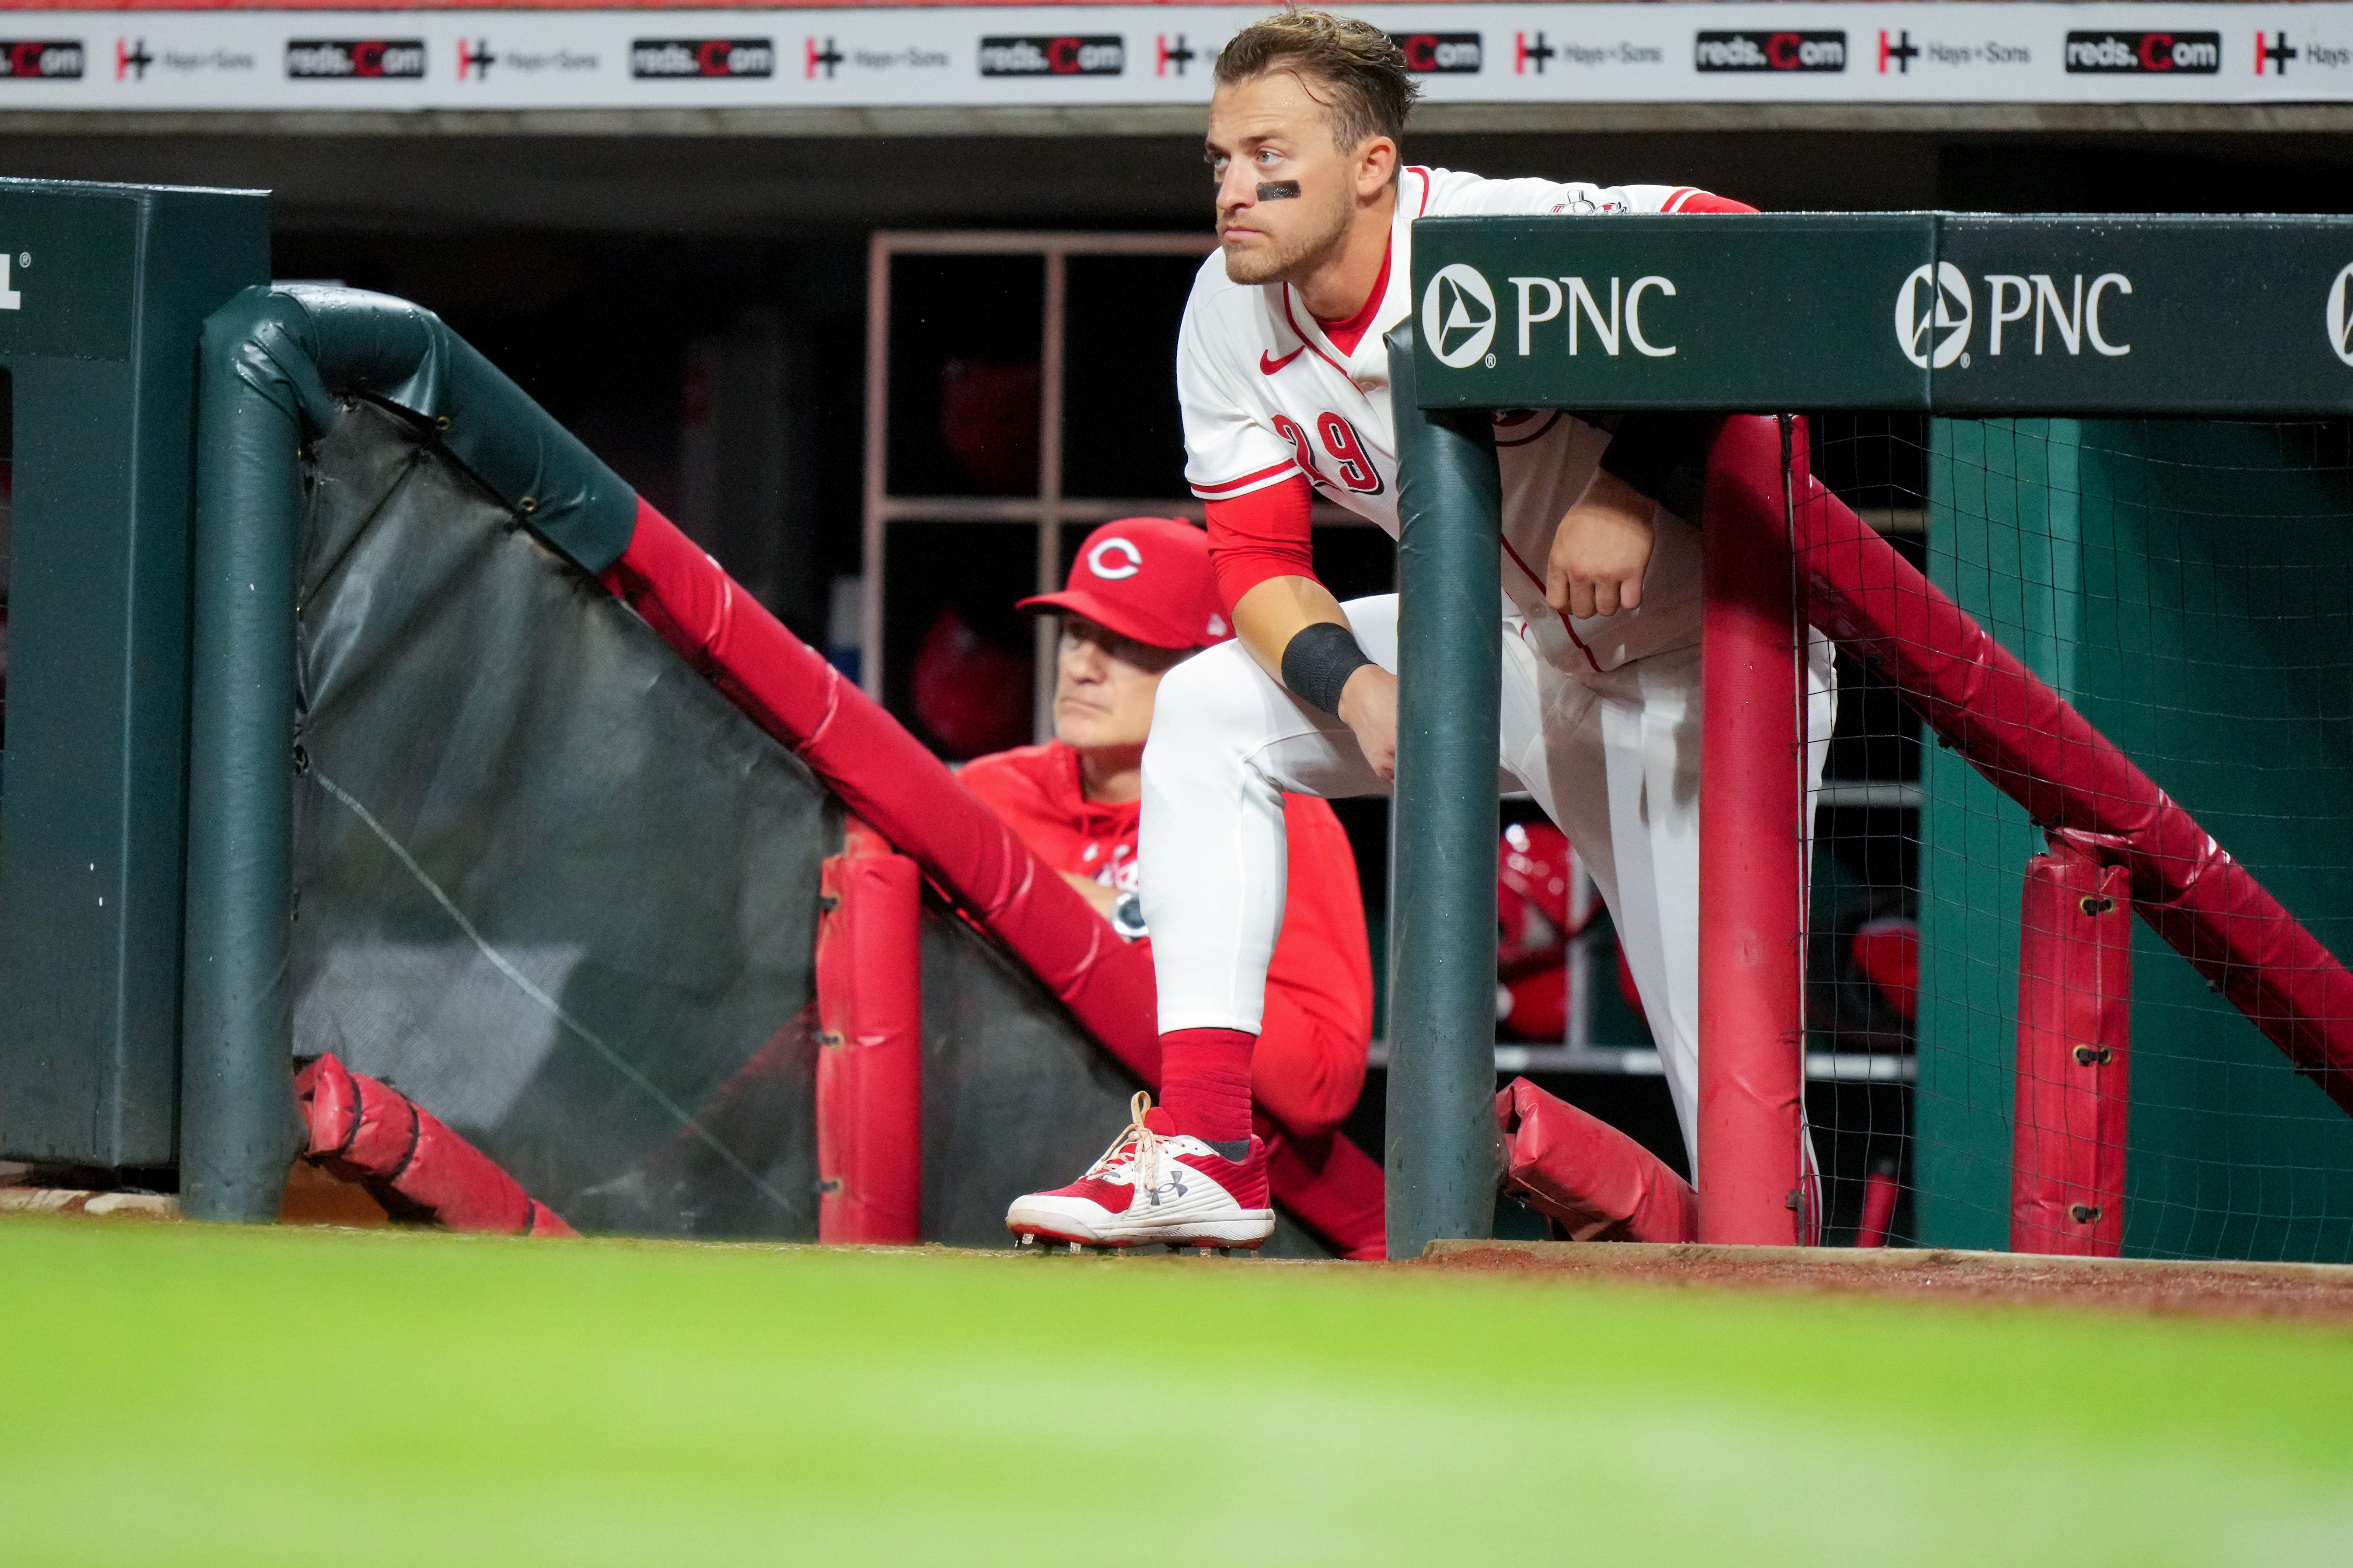 TJ Friedl returns, but the Reds' lineup is still looking to get back on track